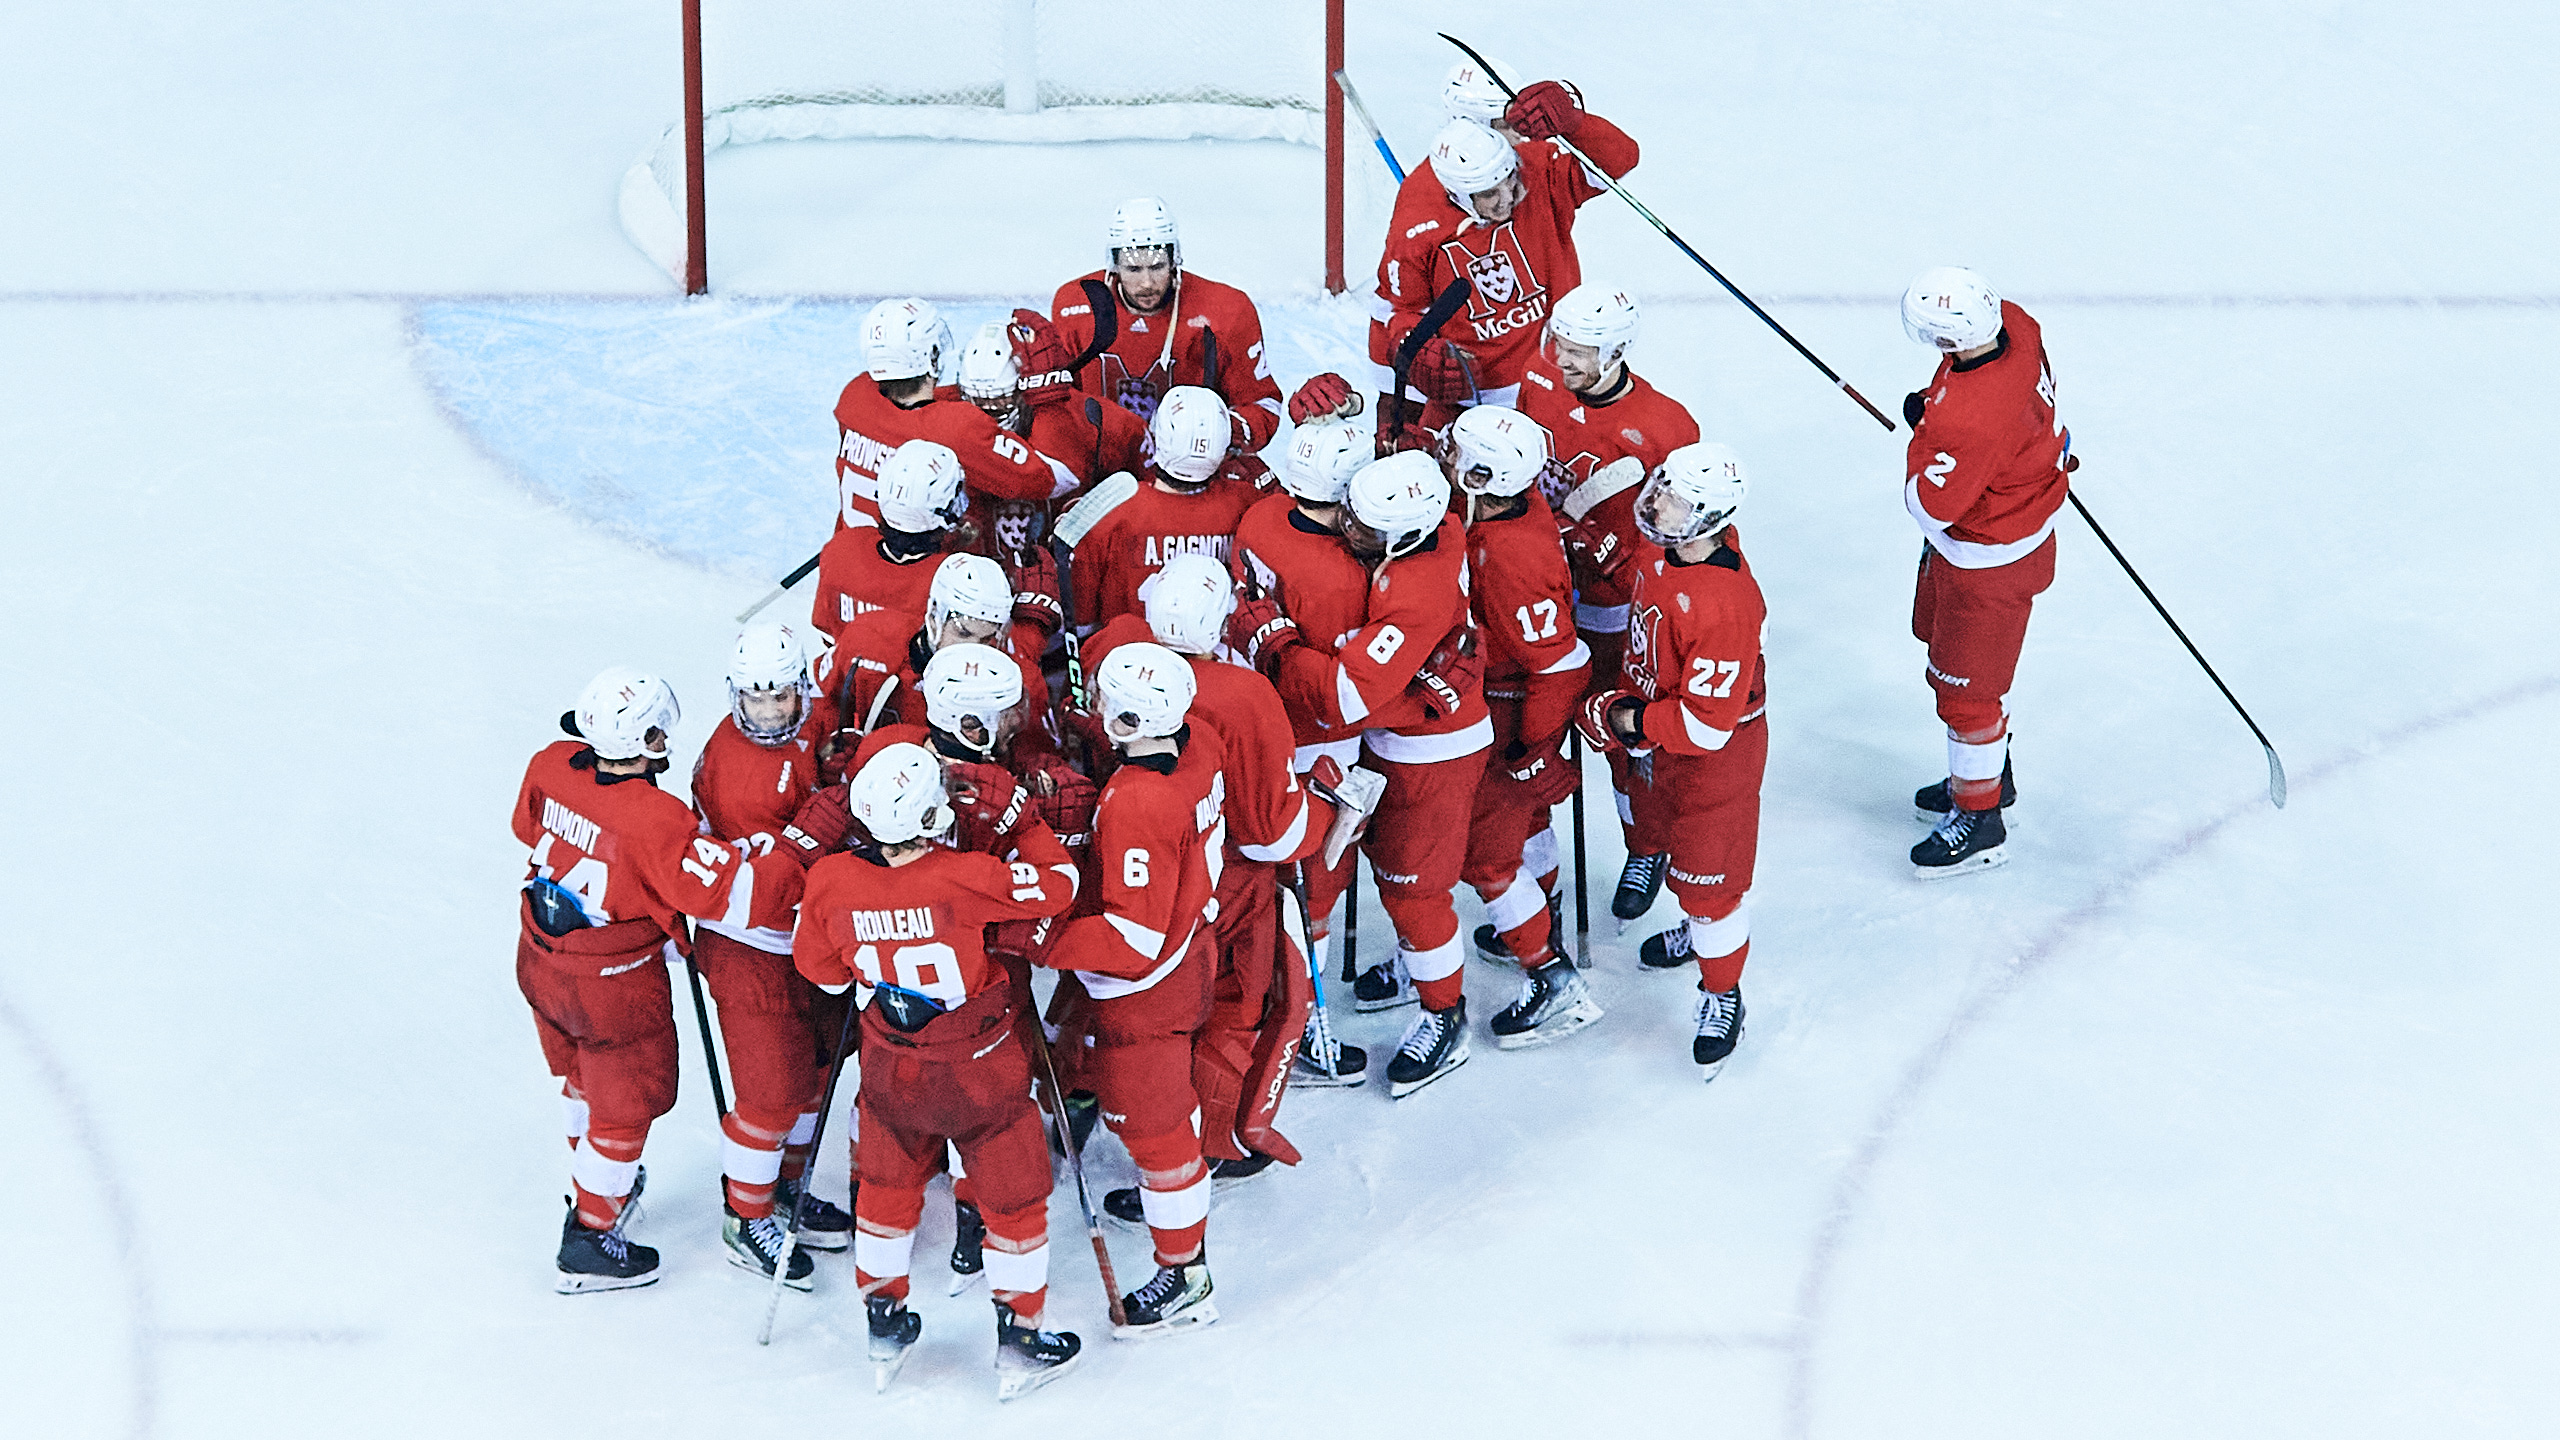 The McGill Redbirds men's hockey team huddle together on the ice after winning